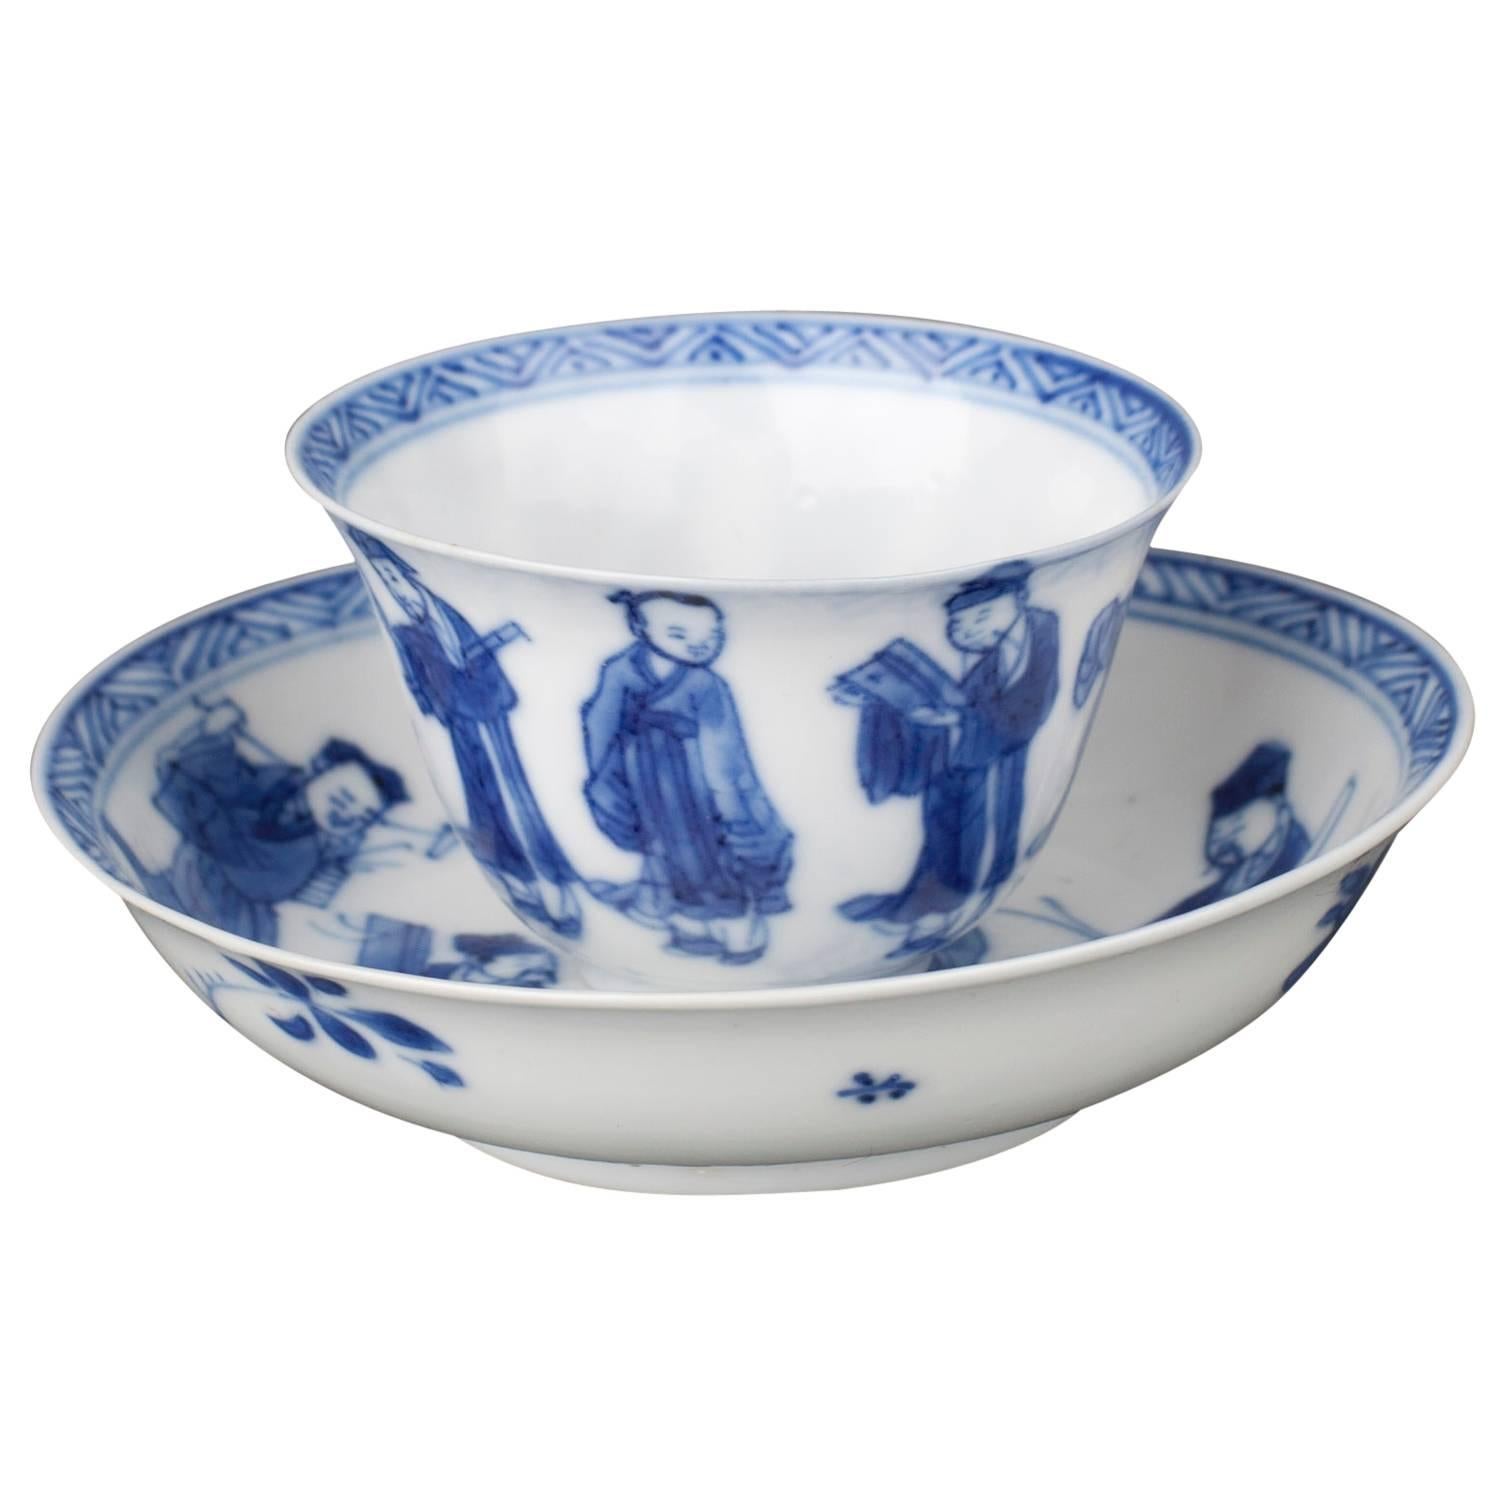 Chinese Porcelain Blue and White Miniature Tea Bowl and Saucer, 17th Century